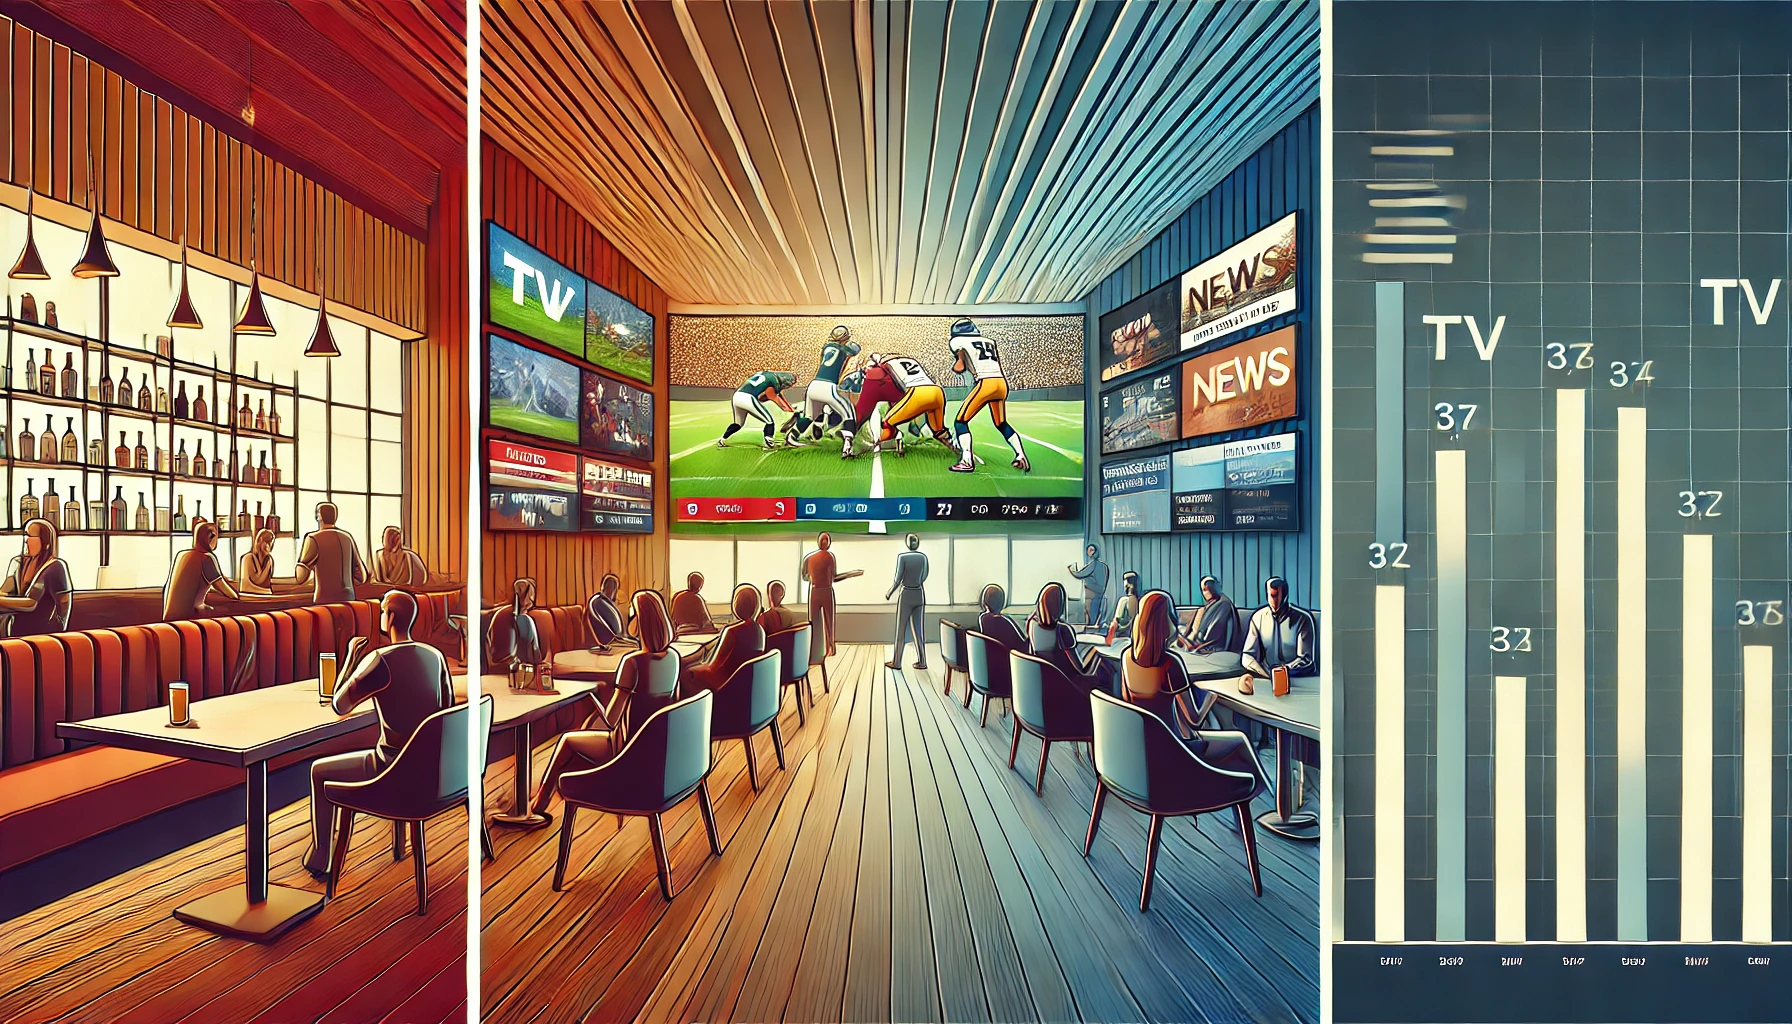 A divided image showing a lively sports bar with patrons cheering at a football game, a modern hotel room with in-room entertainment, and a gym with TVs displaying news and fitness channels.